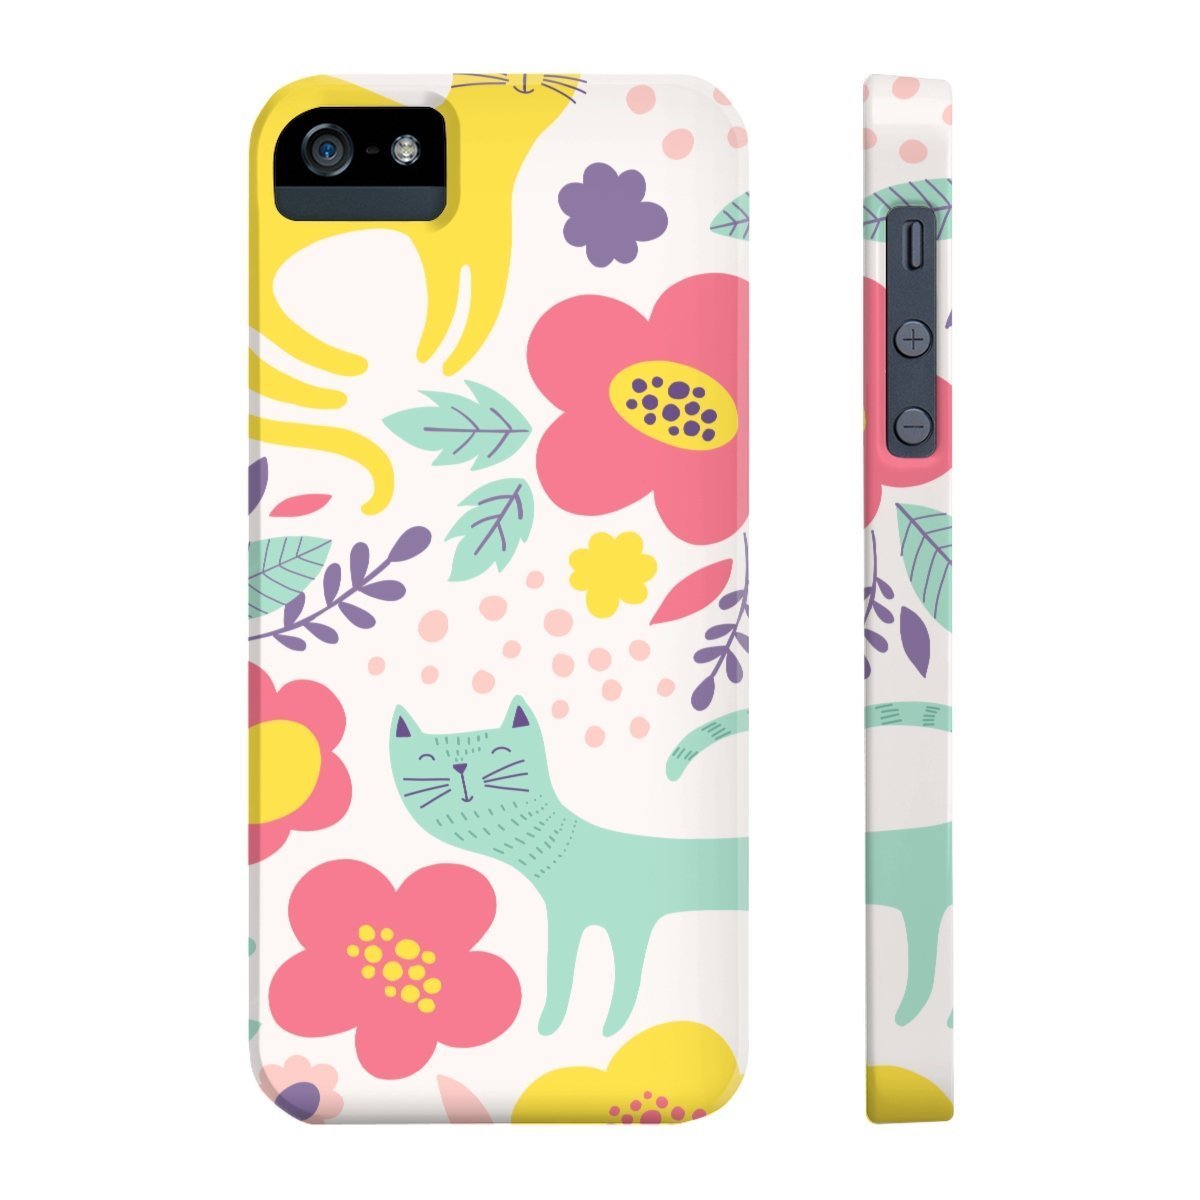 Cat iPhone Case Featuring a Unique and Colorful Cat Print